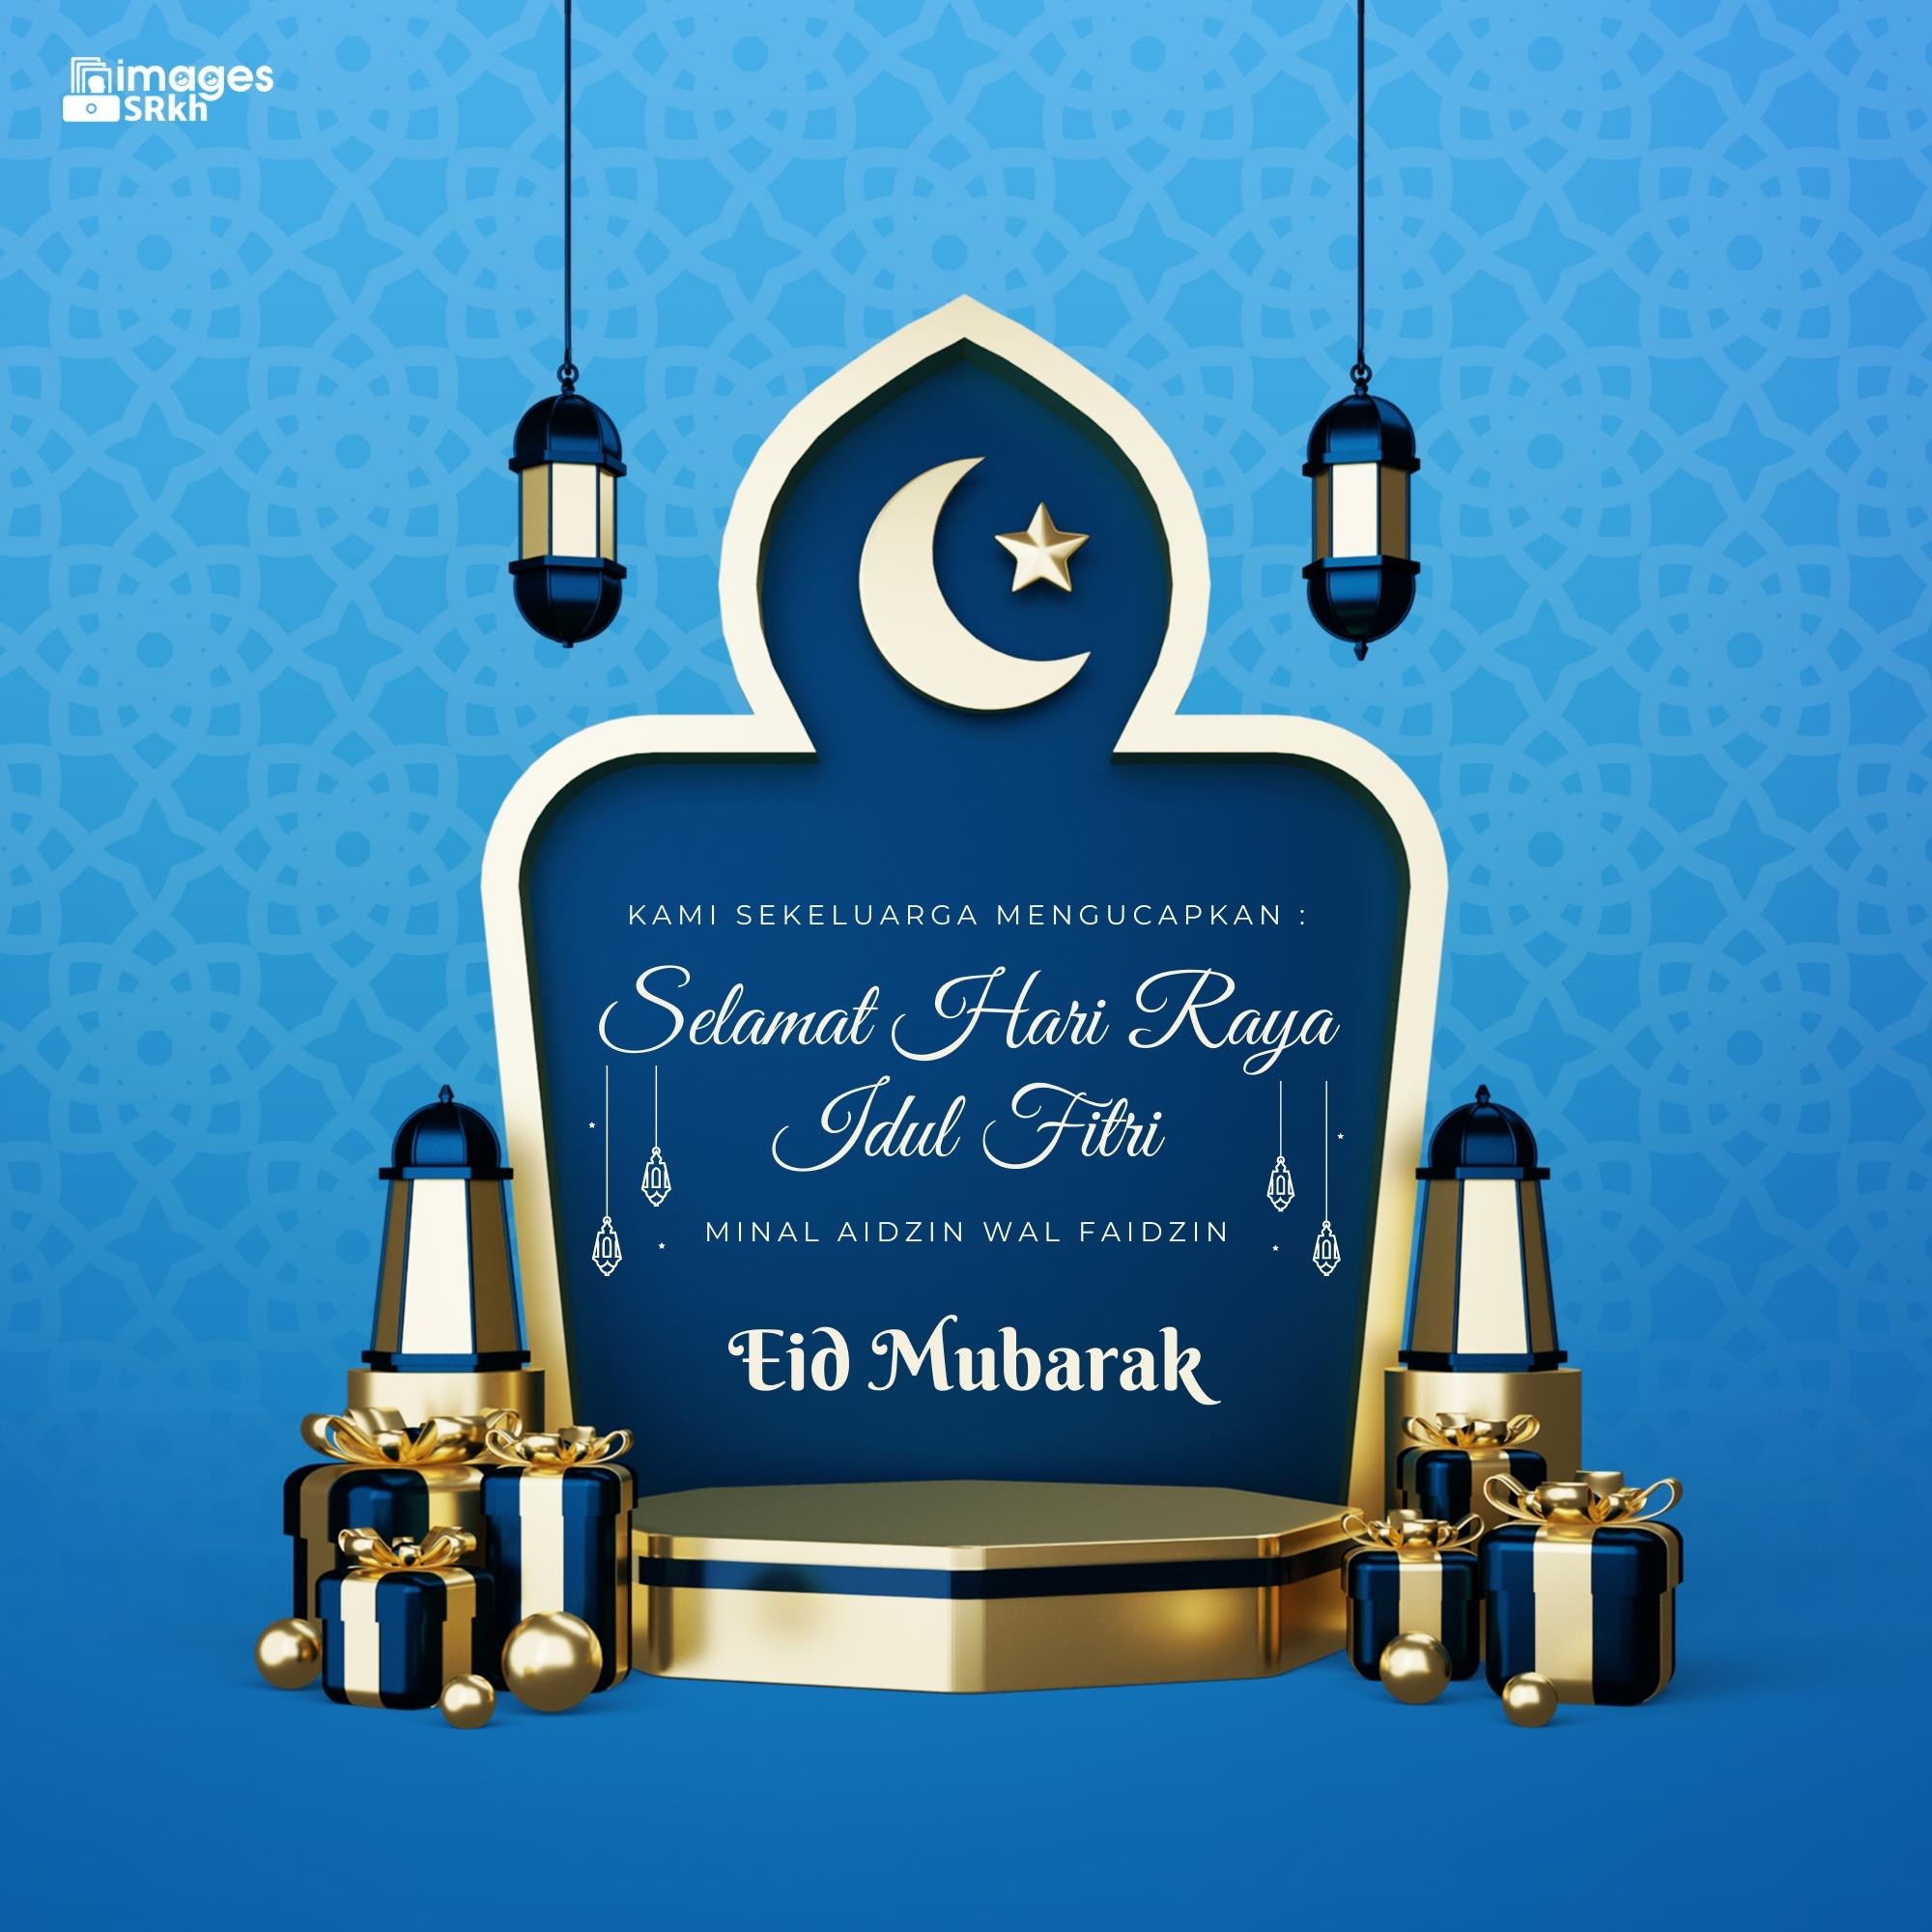 Wishes To Eid Mubarak (6) | Download free in Hd Quality | imagesSRkh